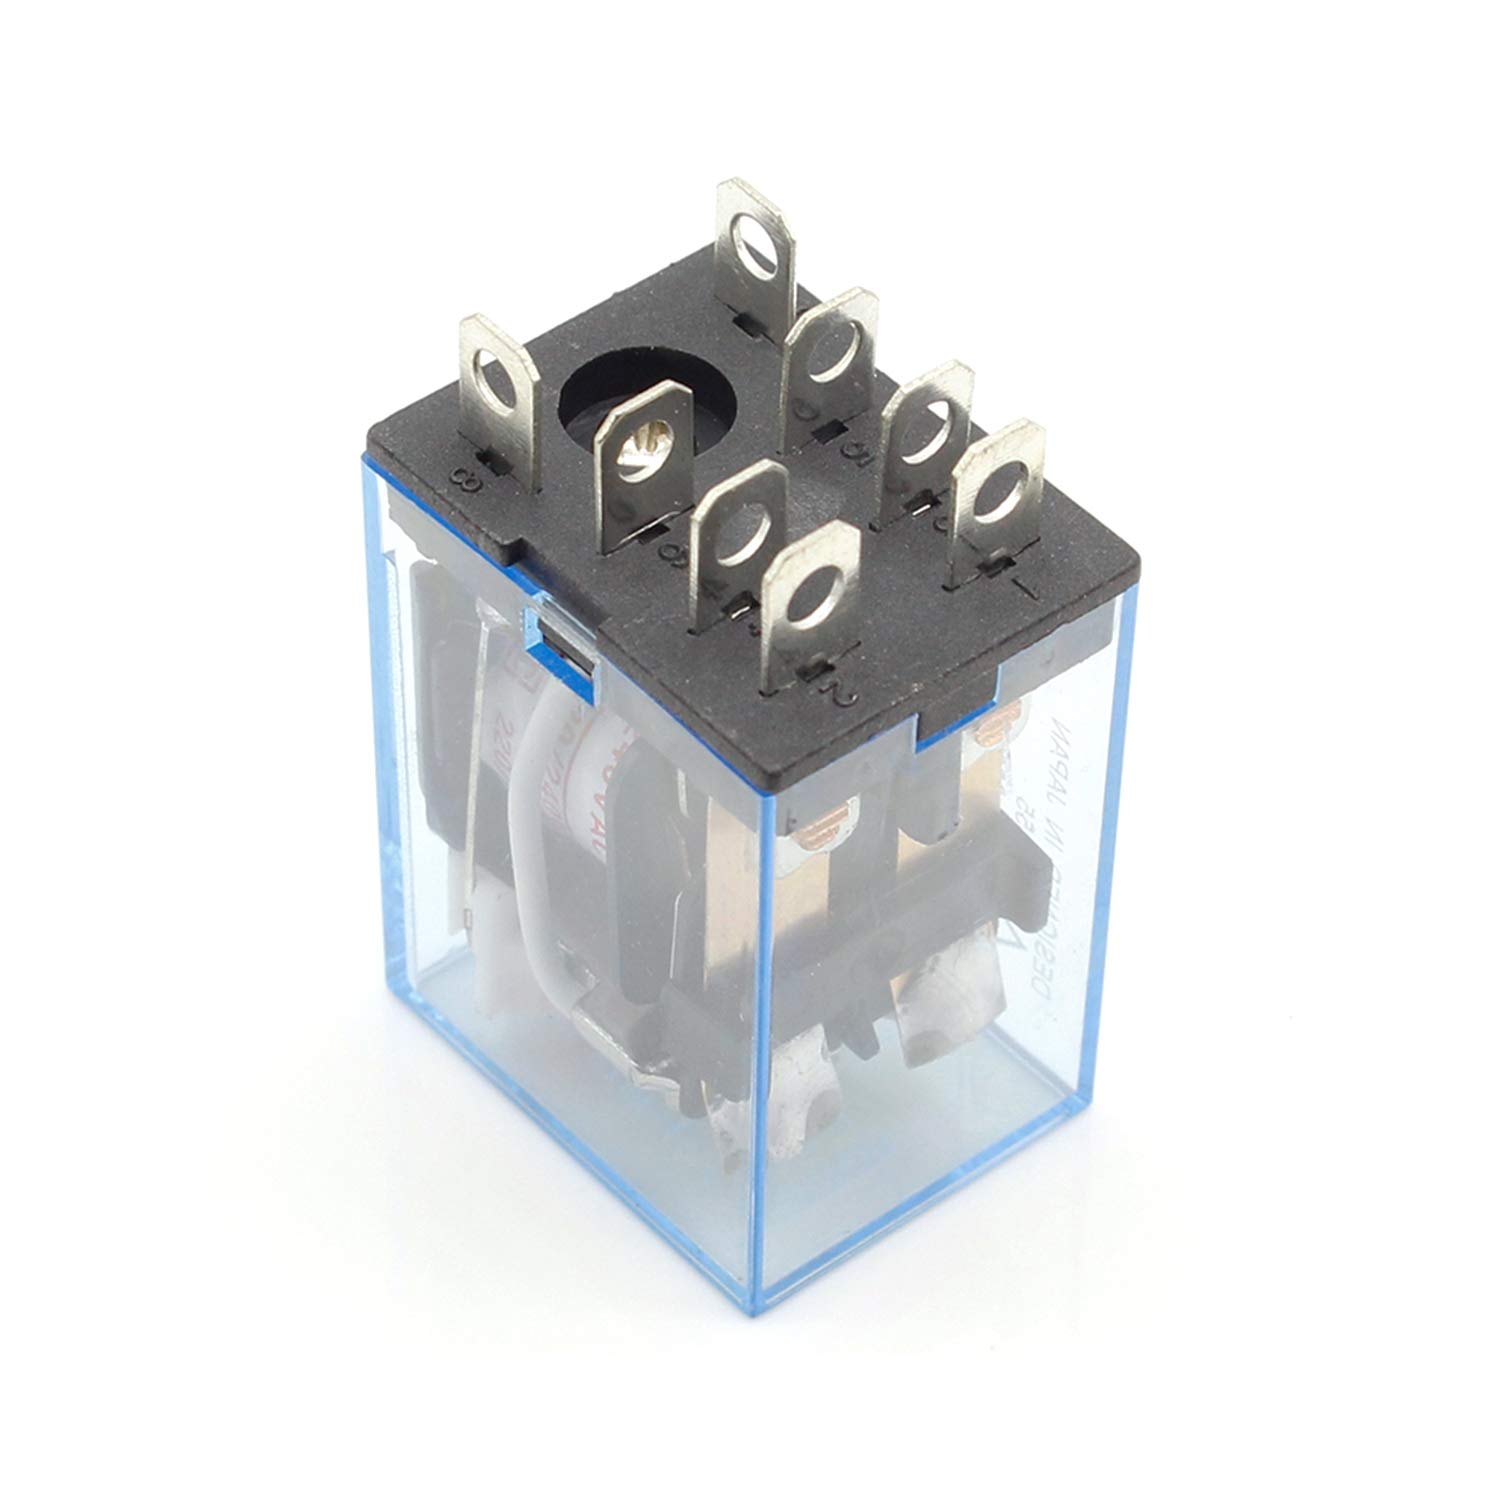 10Pcs-LY2NJ-Relay-DC12V-DC24V-AC110V-AC220V-Small-Relay-10A-8-Pins-Coil-DPDT-With-Socket-Base-1758422-3